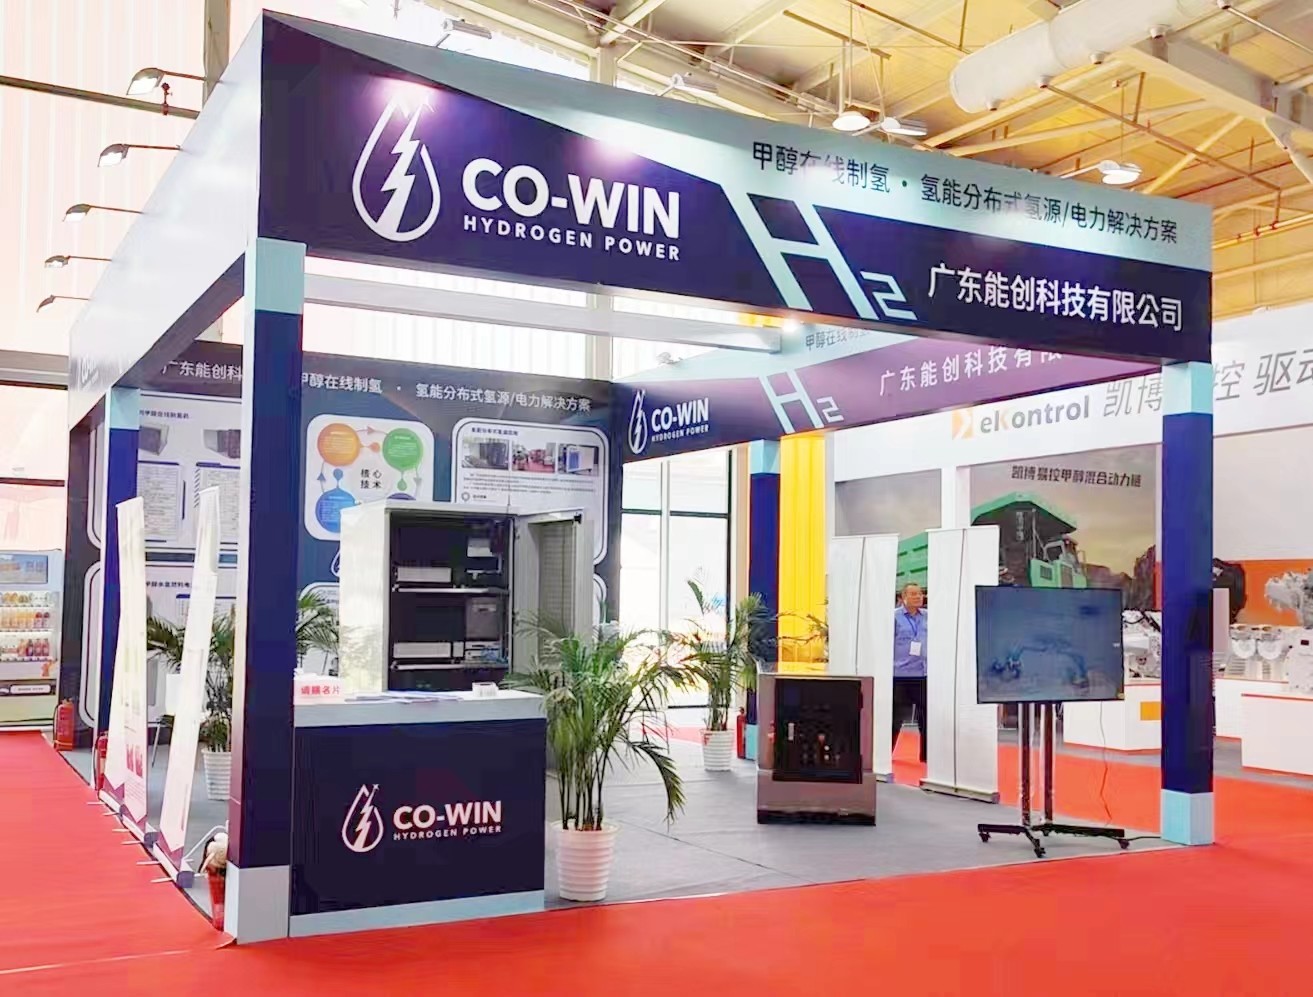 Guangdong Nengchuang Technology appeared in the fifth Methanol Automobile Show, showing the technology and solutions of hydrogen production fuel cell from methanol